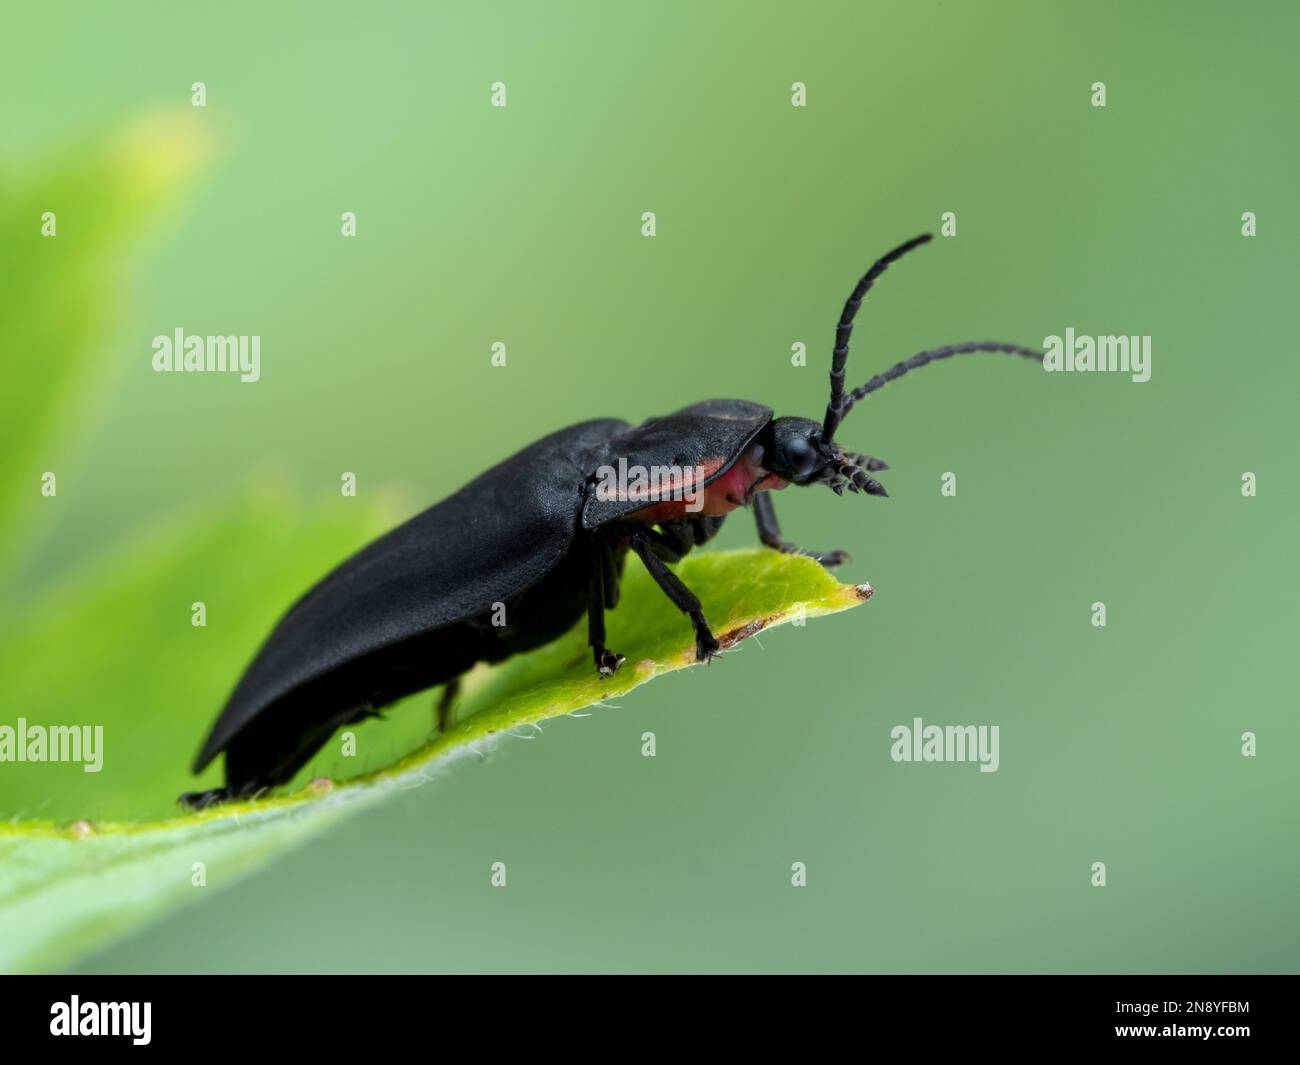 side view of a striking black and red Pacific Northwest firefly (Ellychnia hatchi) crawling on a leaf Stock Photo